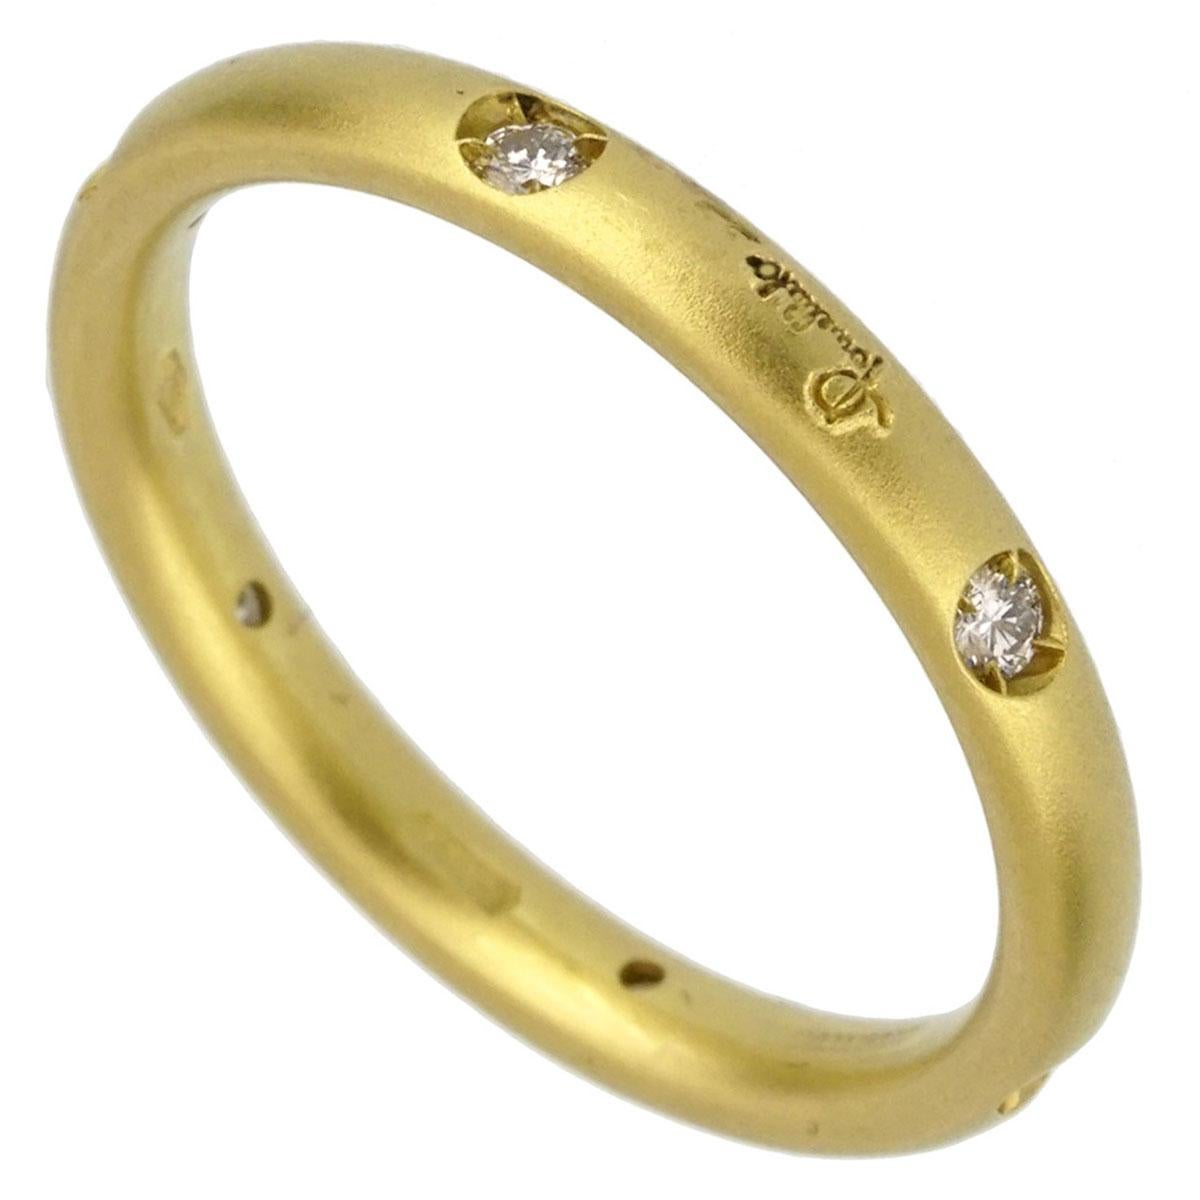 A chic brand new Pomellato diamond ring adorned with round brilliant cut diamonds in 18k yellow gold. The ring measures a size 6 1/2

Sku: 2363